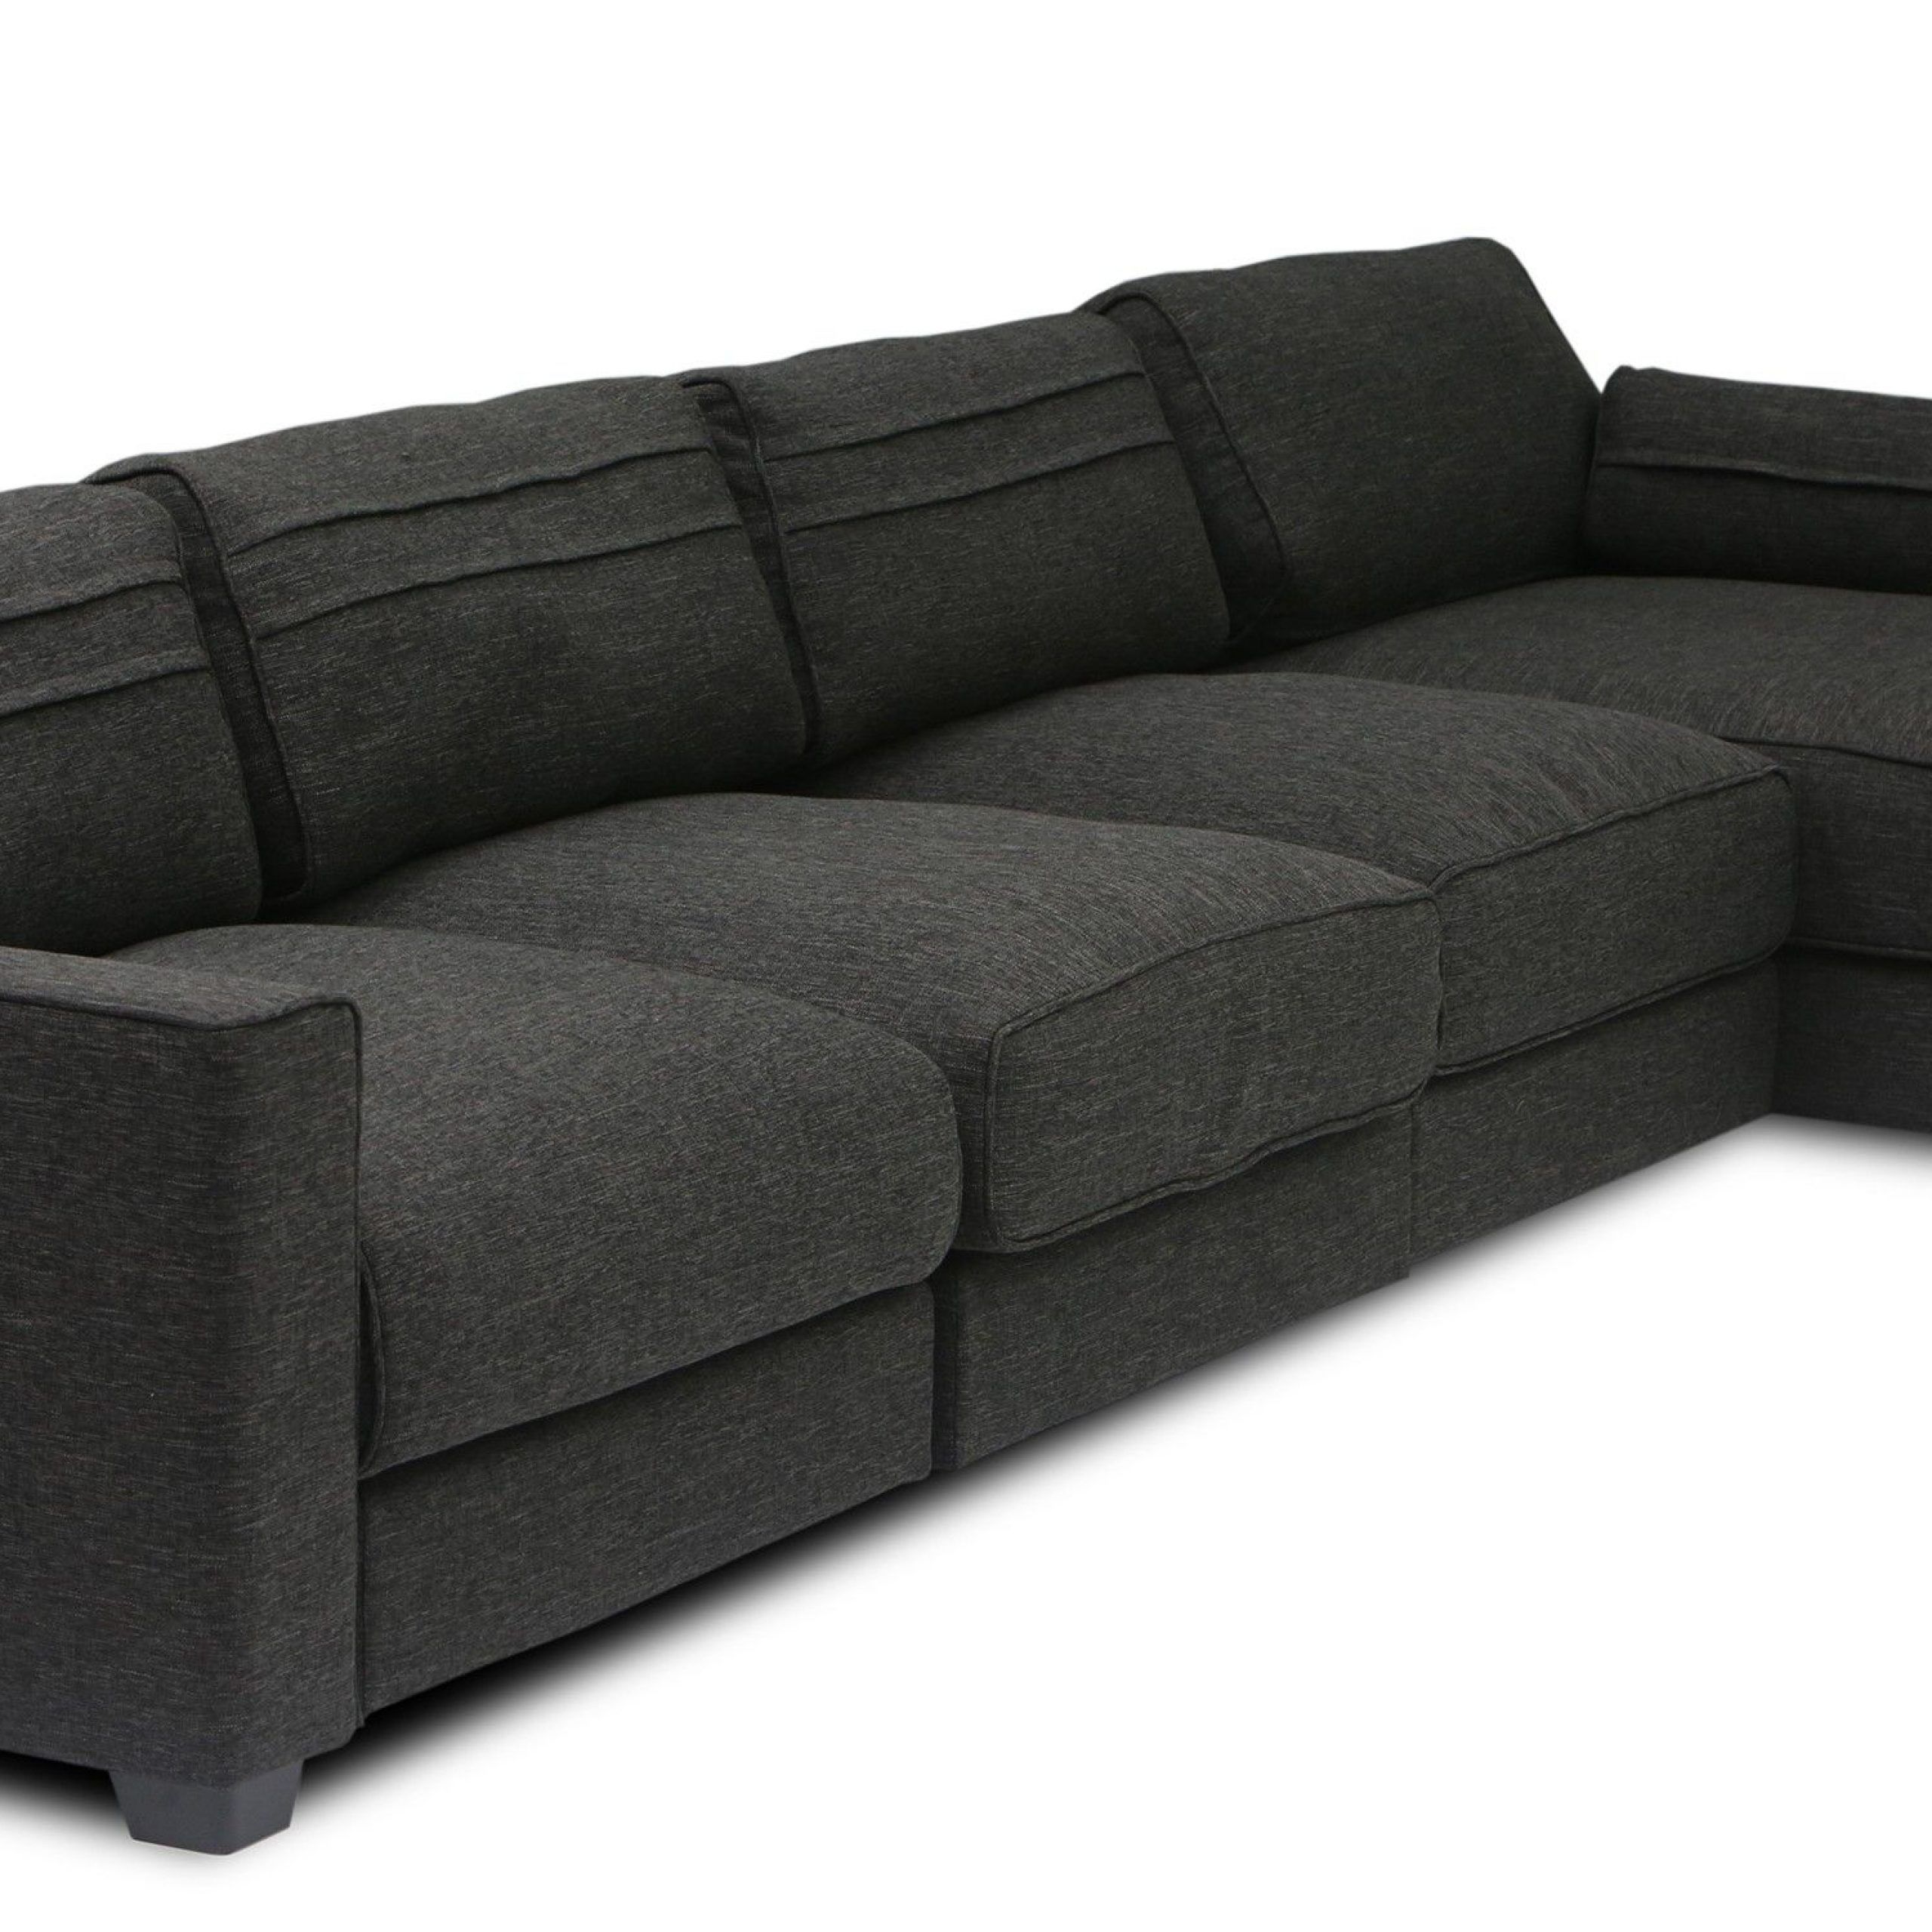 Vani Modular 3 Seat Right Sectional With Chaise In Alani Mid Century Modern Sectional Sofas With Chaise (View 11 of 15)